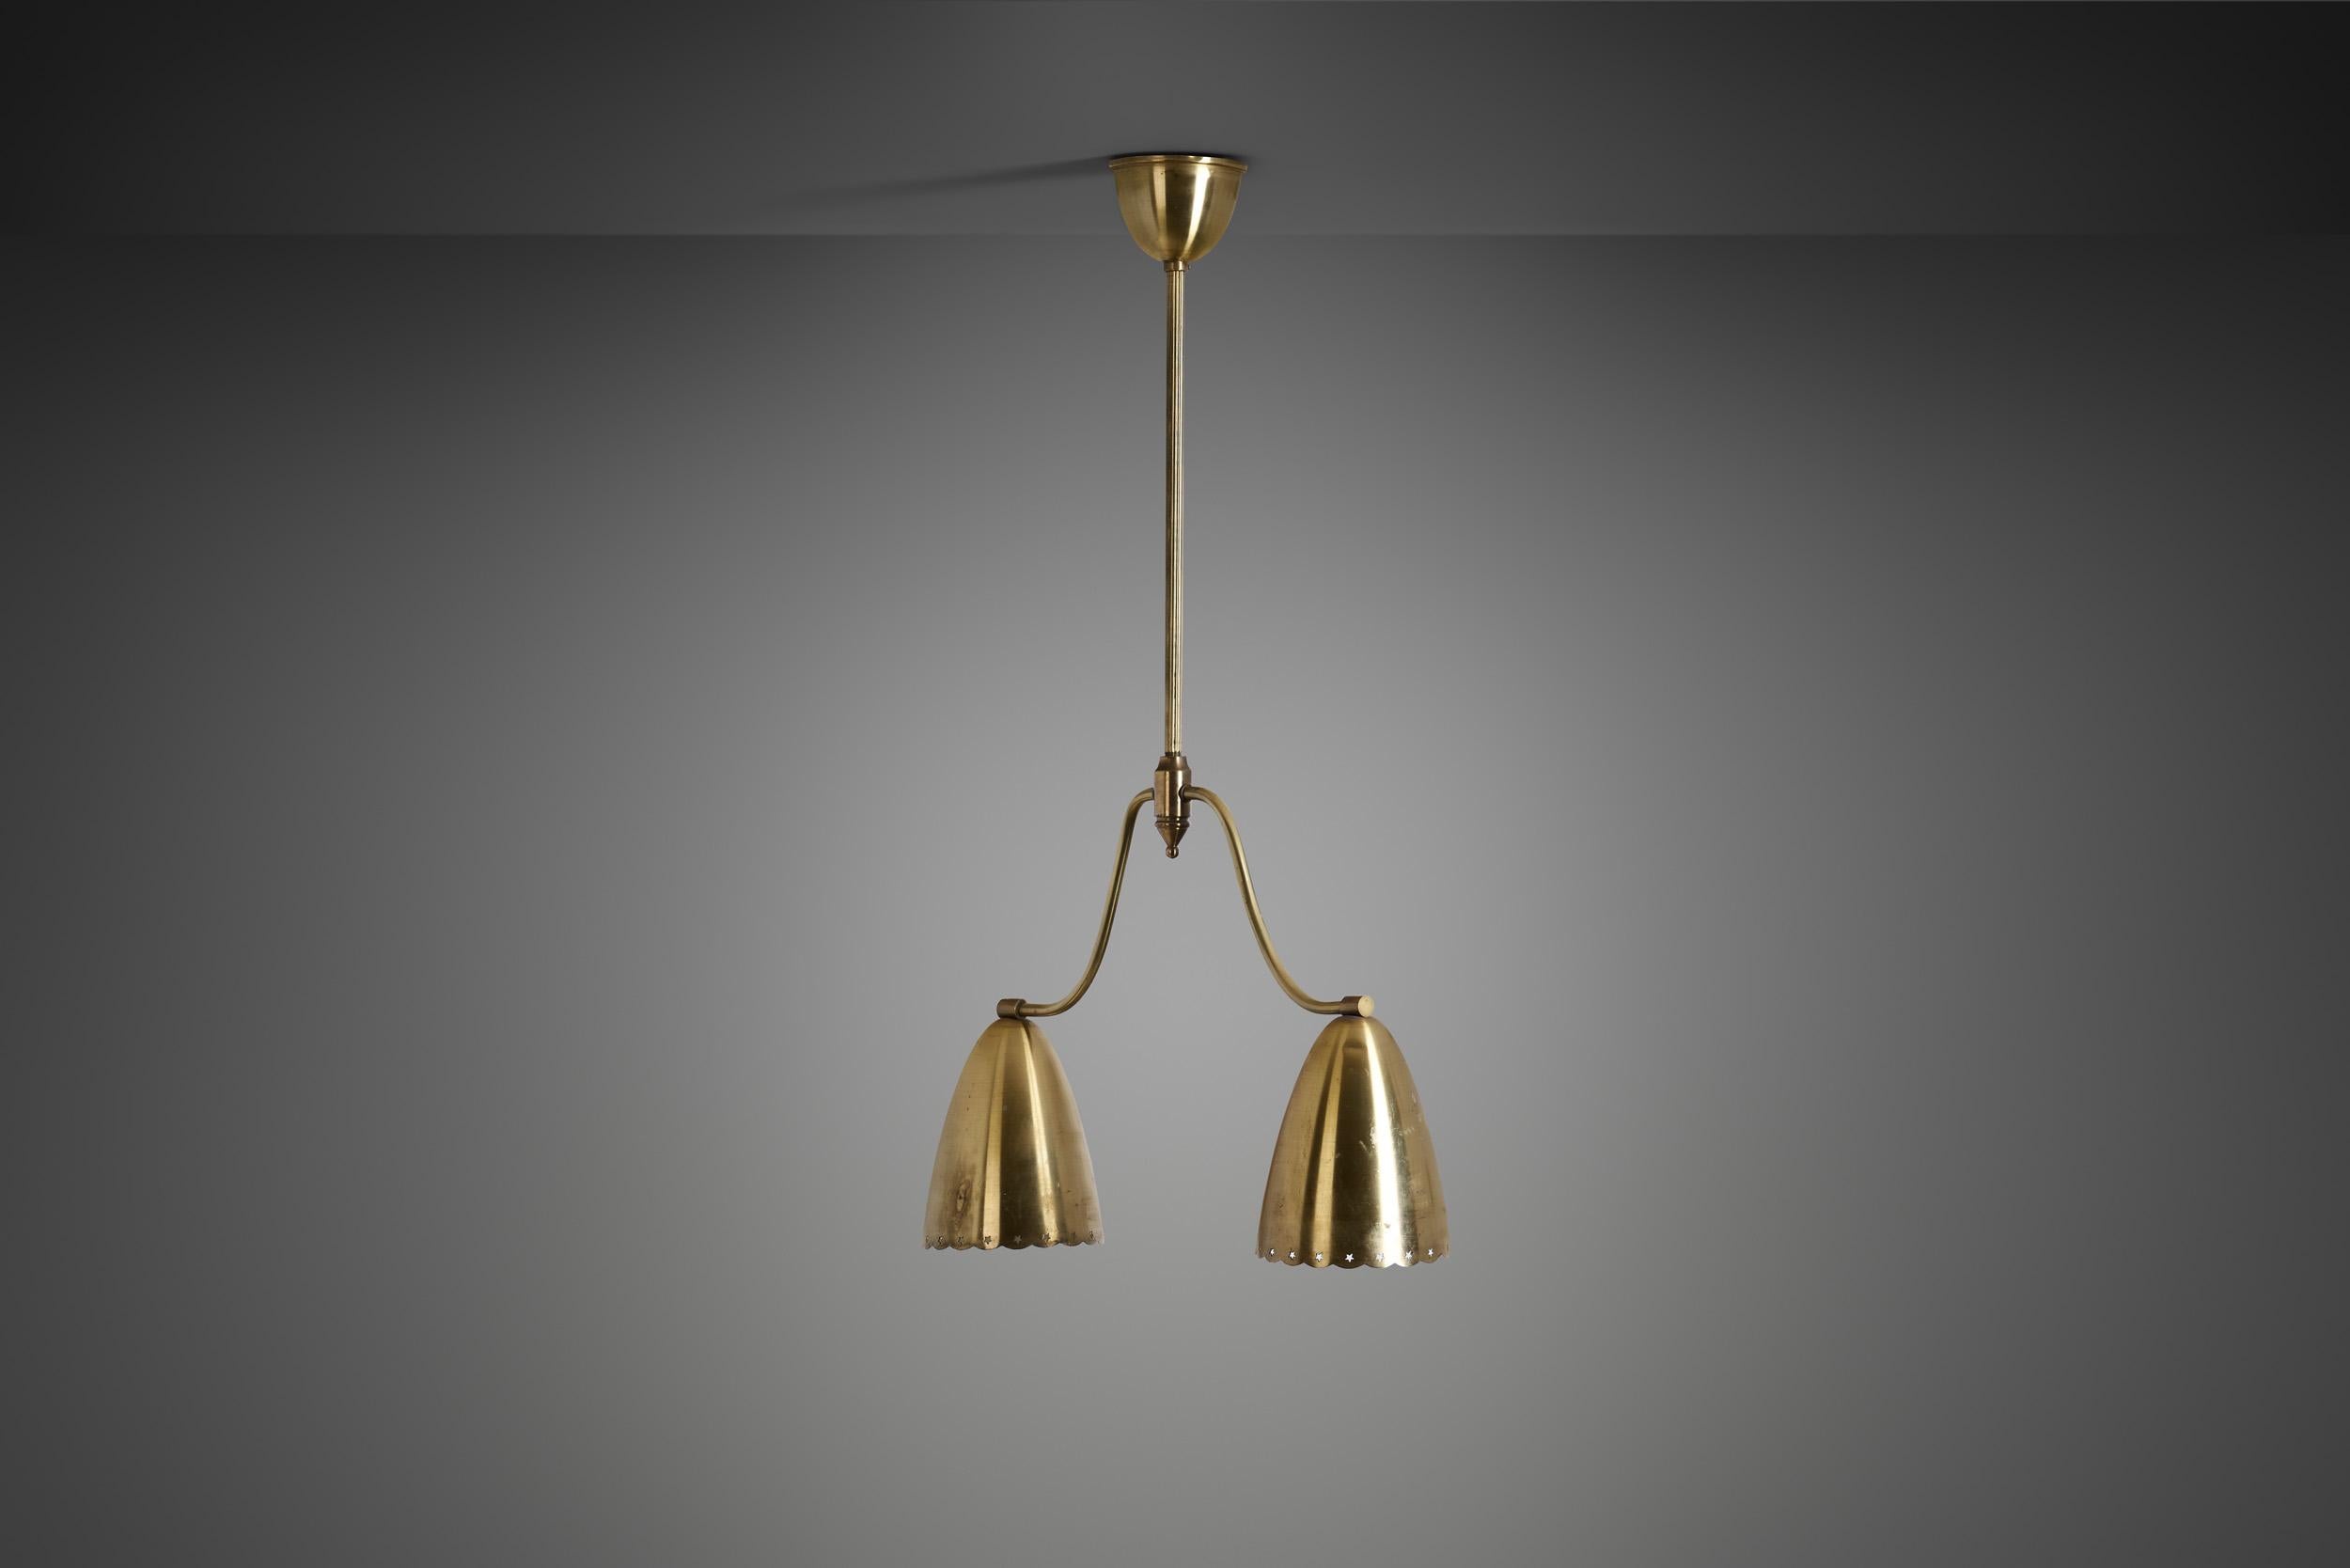 Scandinavian Modern Swedish Two-Arm Ceiling Light with Star Decoration, Sweden, 1940s